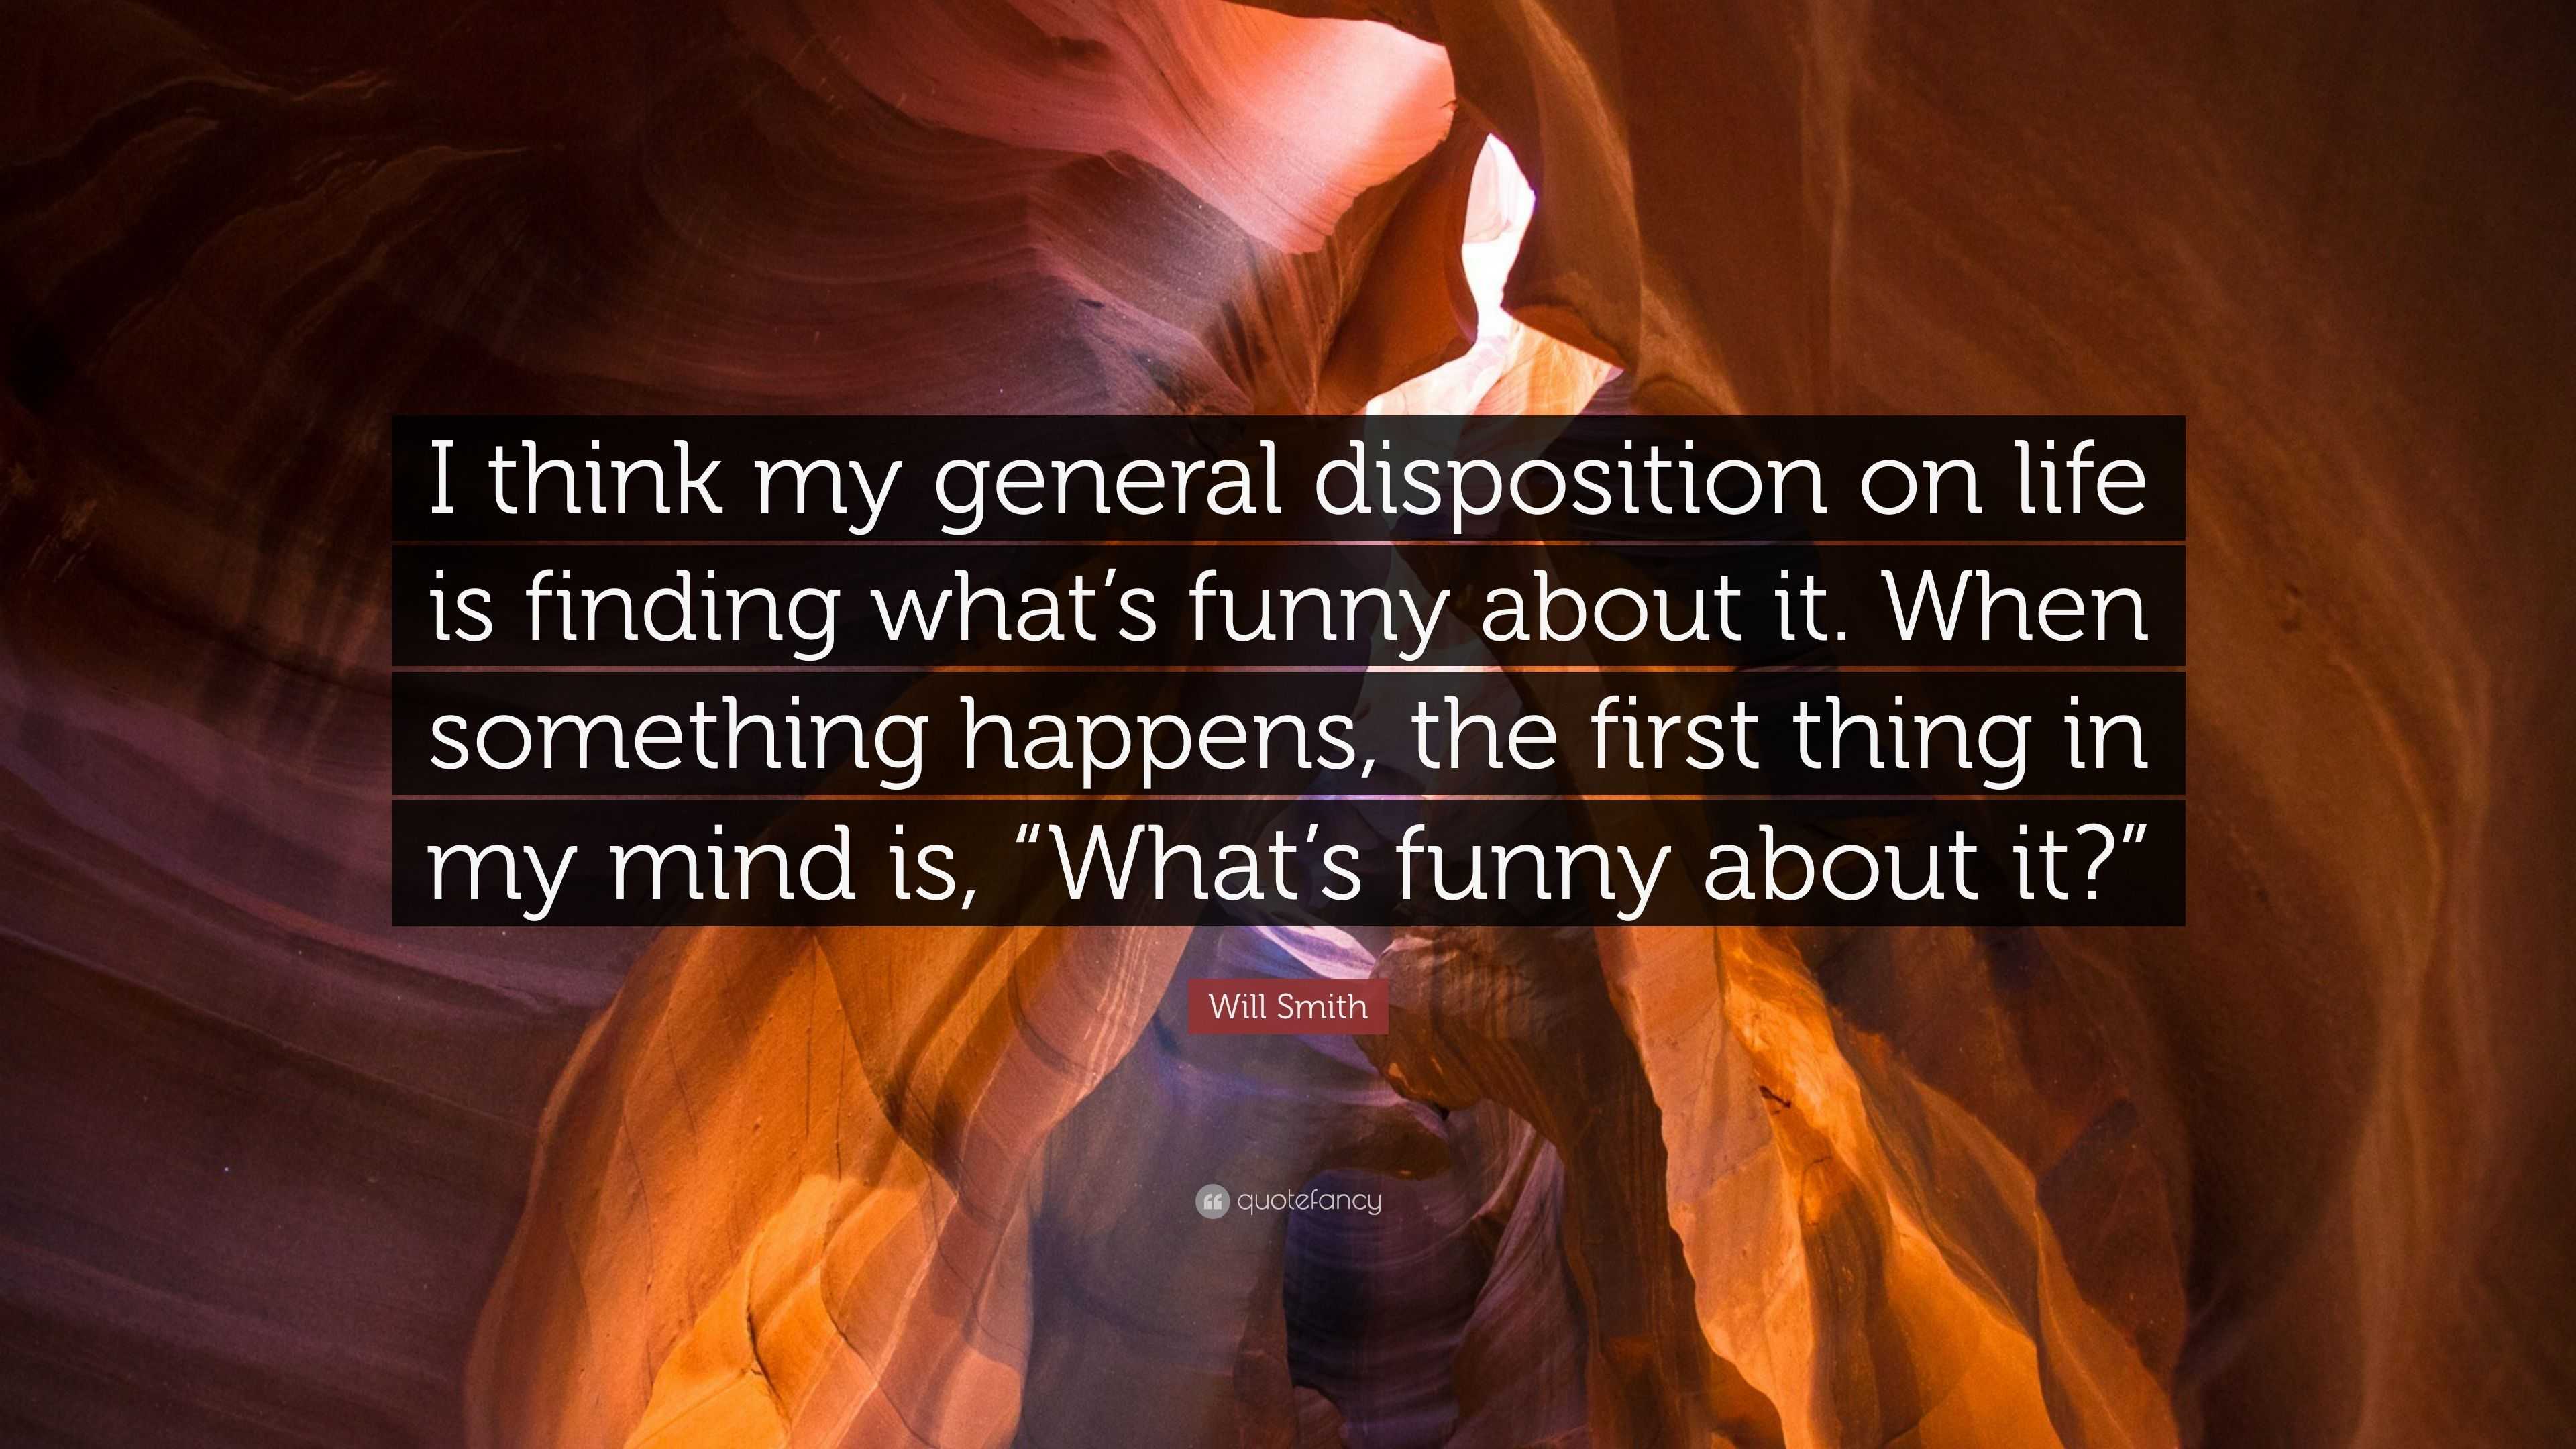 Will Smith Quote “I think my general disposition on life is finding what s funny